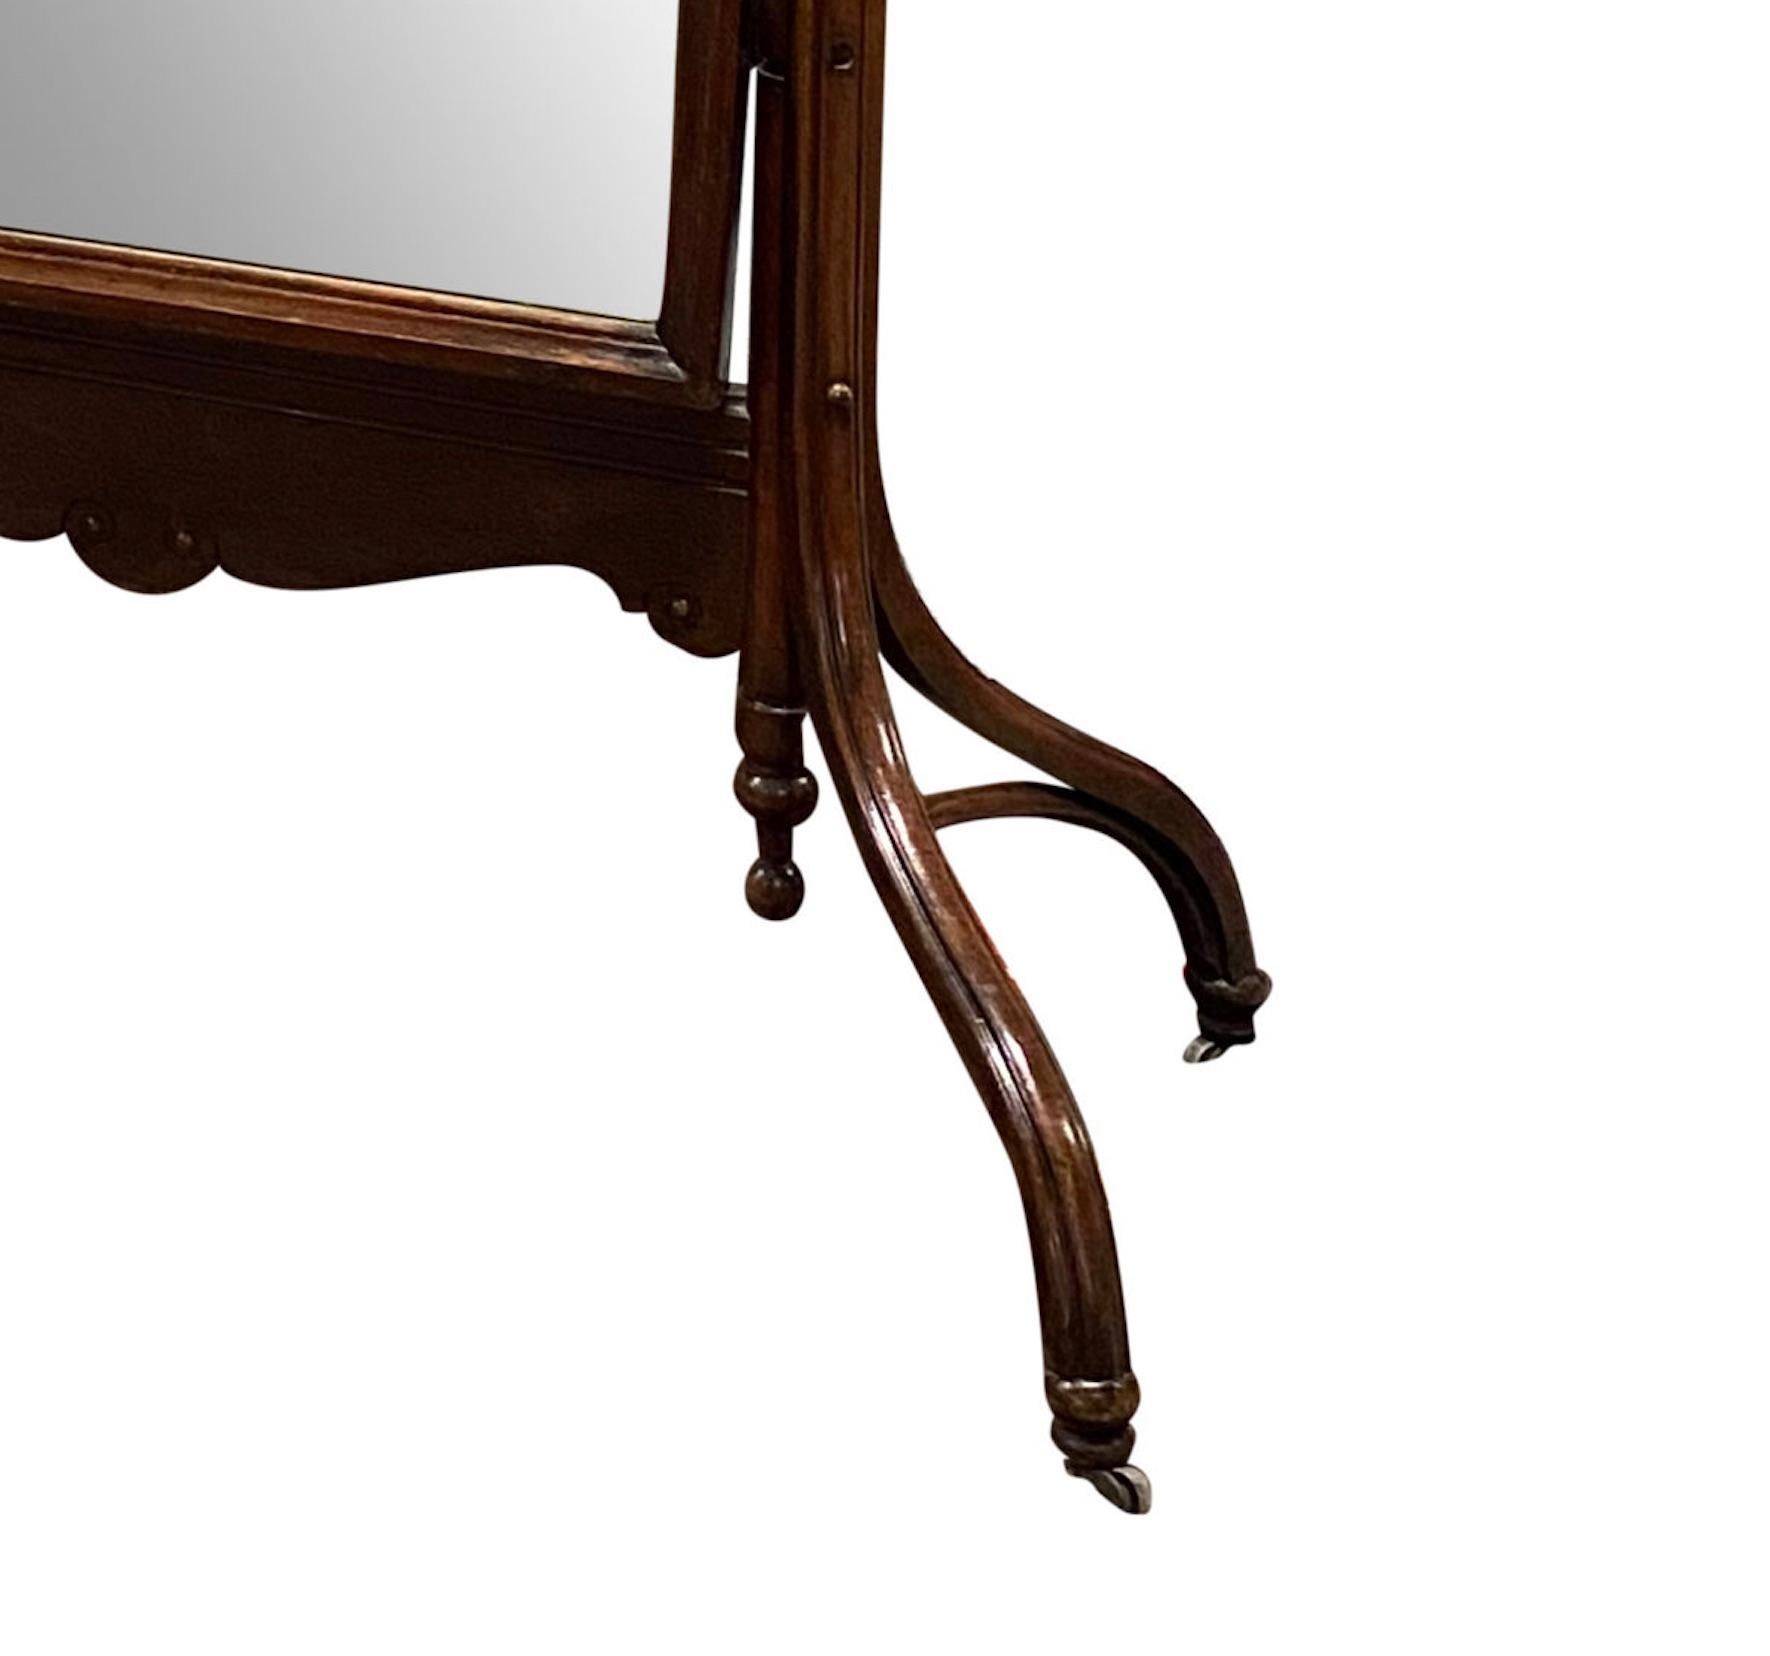 A cheval mirror with rounded top, splaying legs, terminating in brass casters

Made in England

69″ OAH x 49″ OAW x 21″ Deep (4′ x 24.5″W glass)